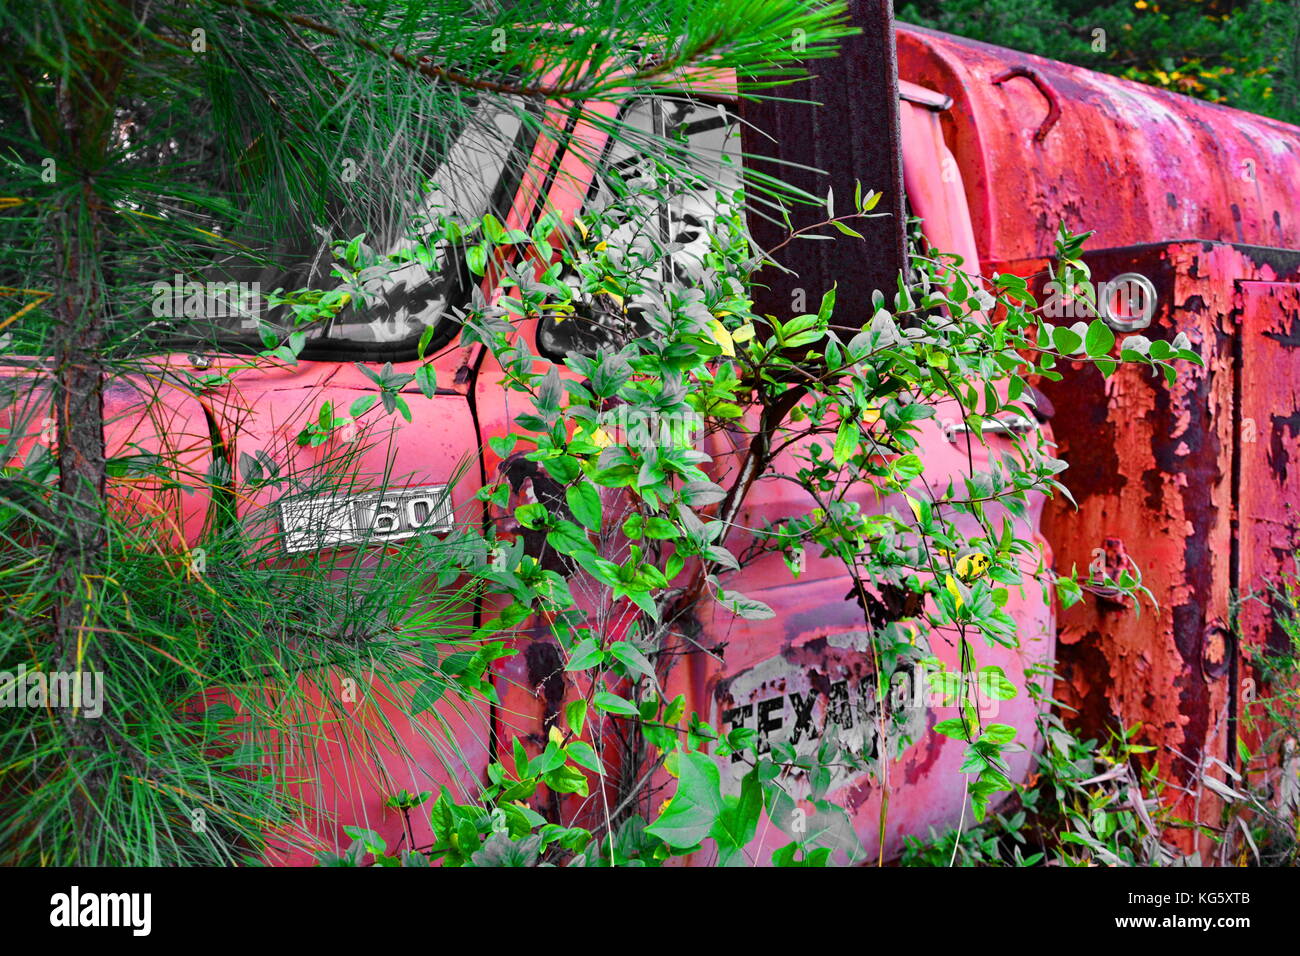 Abandoned and derelict Chevrolet Texaco tanker truck overgrown on the edge of a forest. Stock Photo